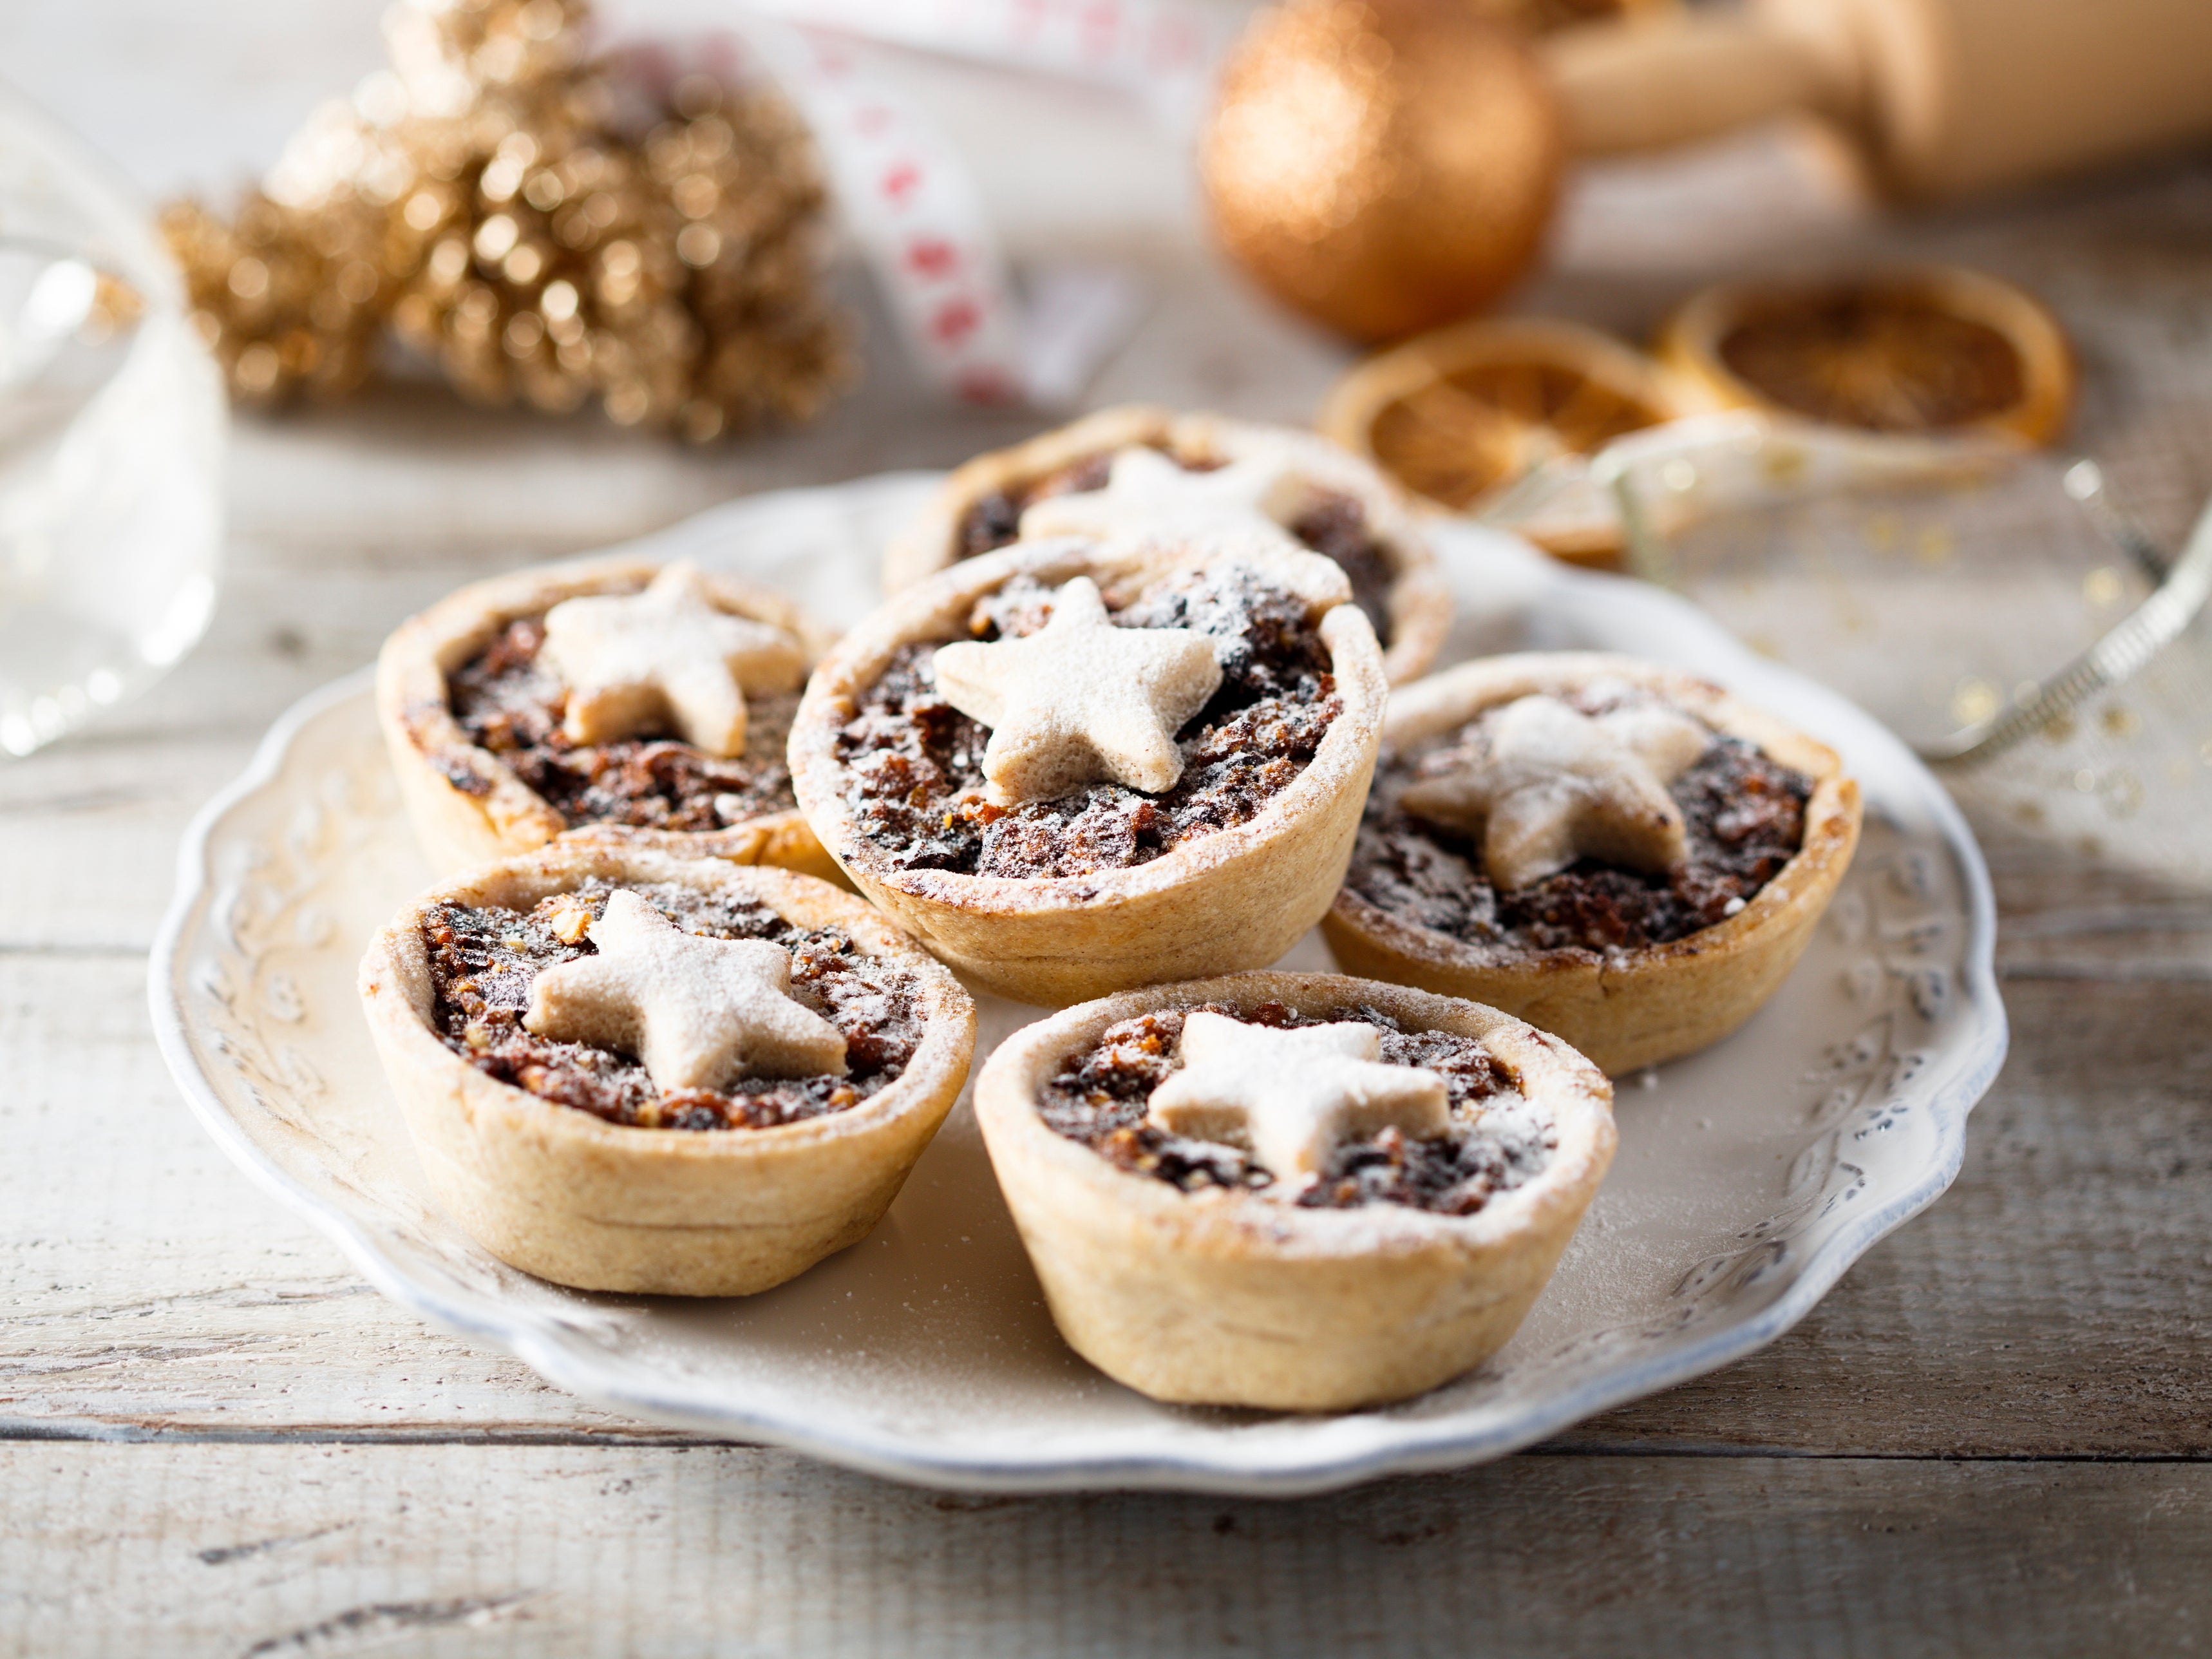 Give your personal finances the once over – but only after all the mince pies are eaten